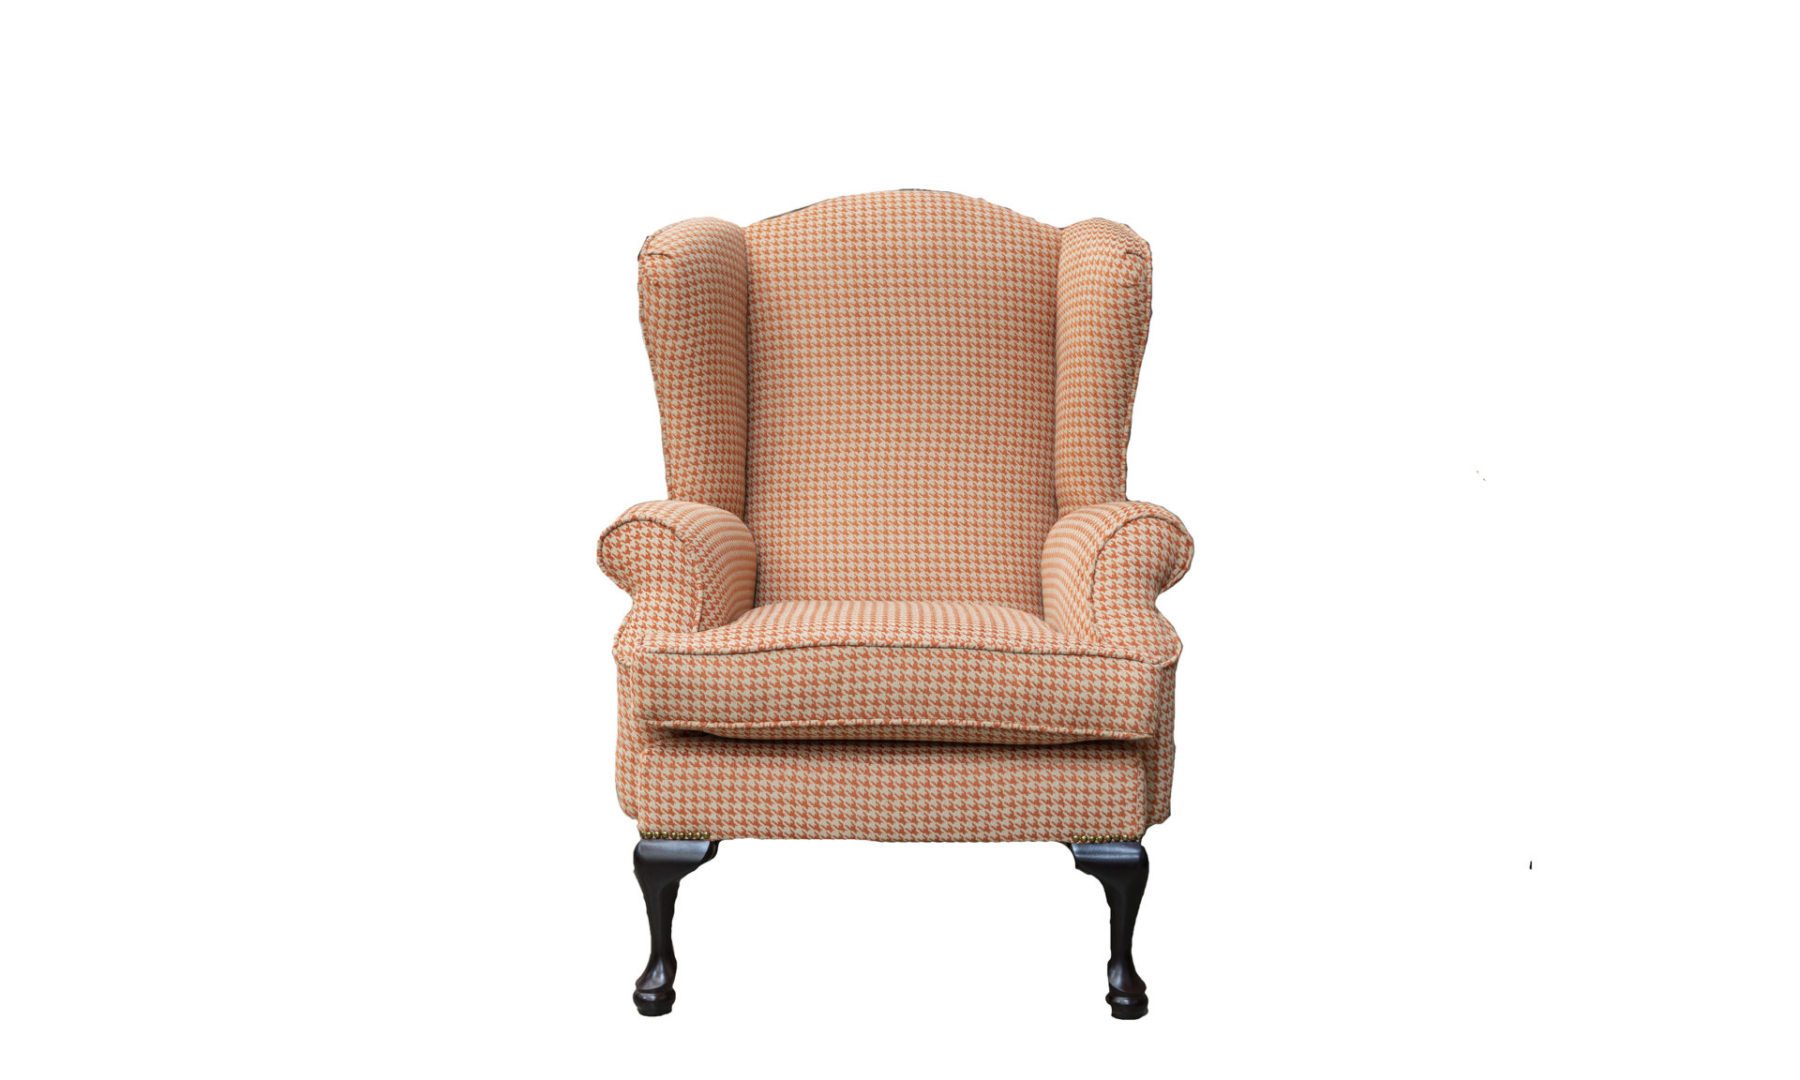 Queen Anne Chair in Poppy Orange, Silver Collection Fabric